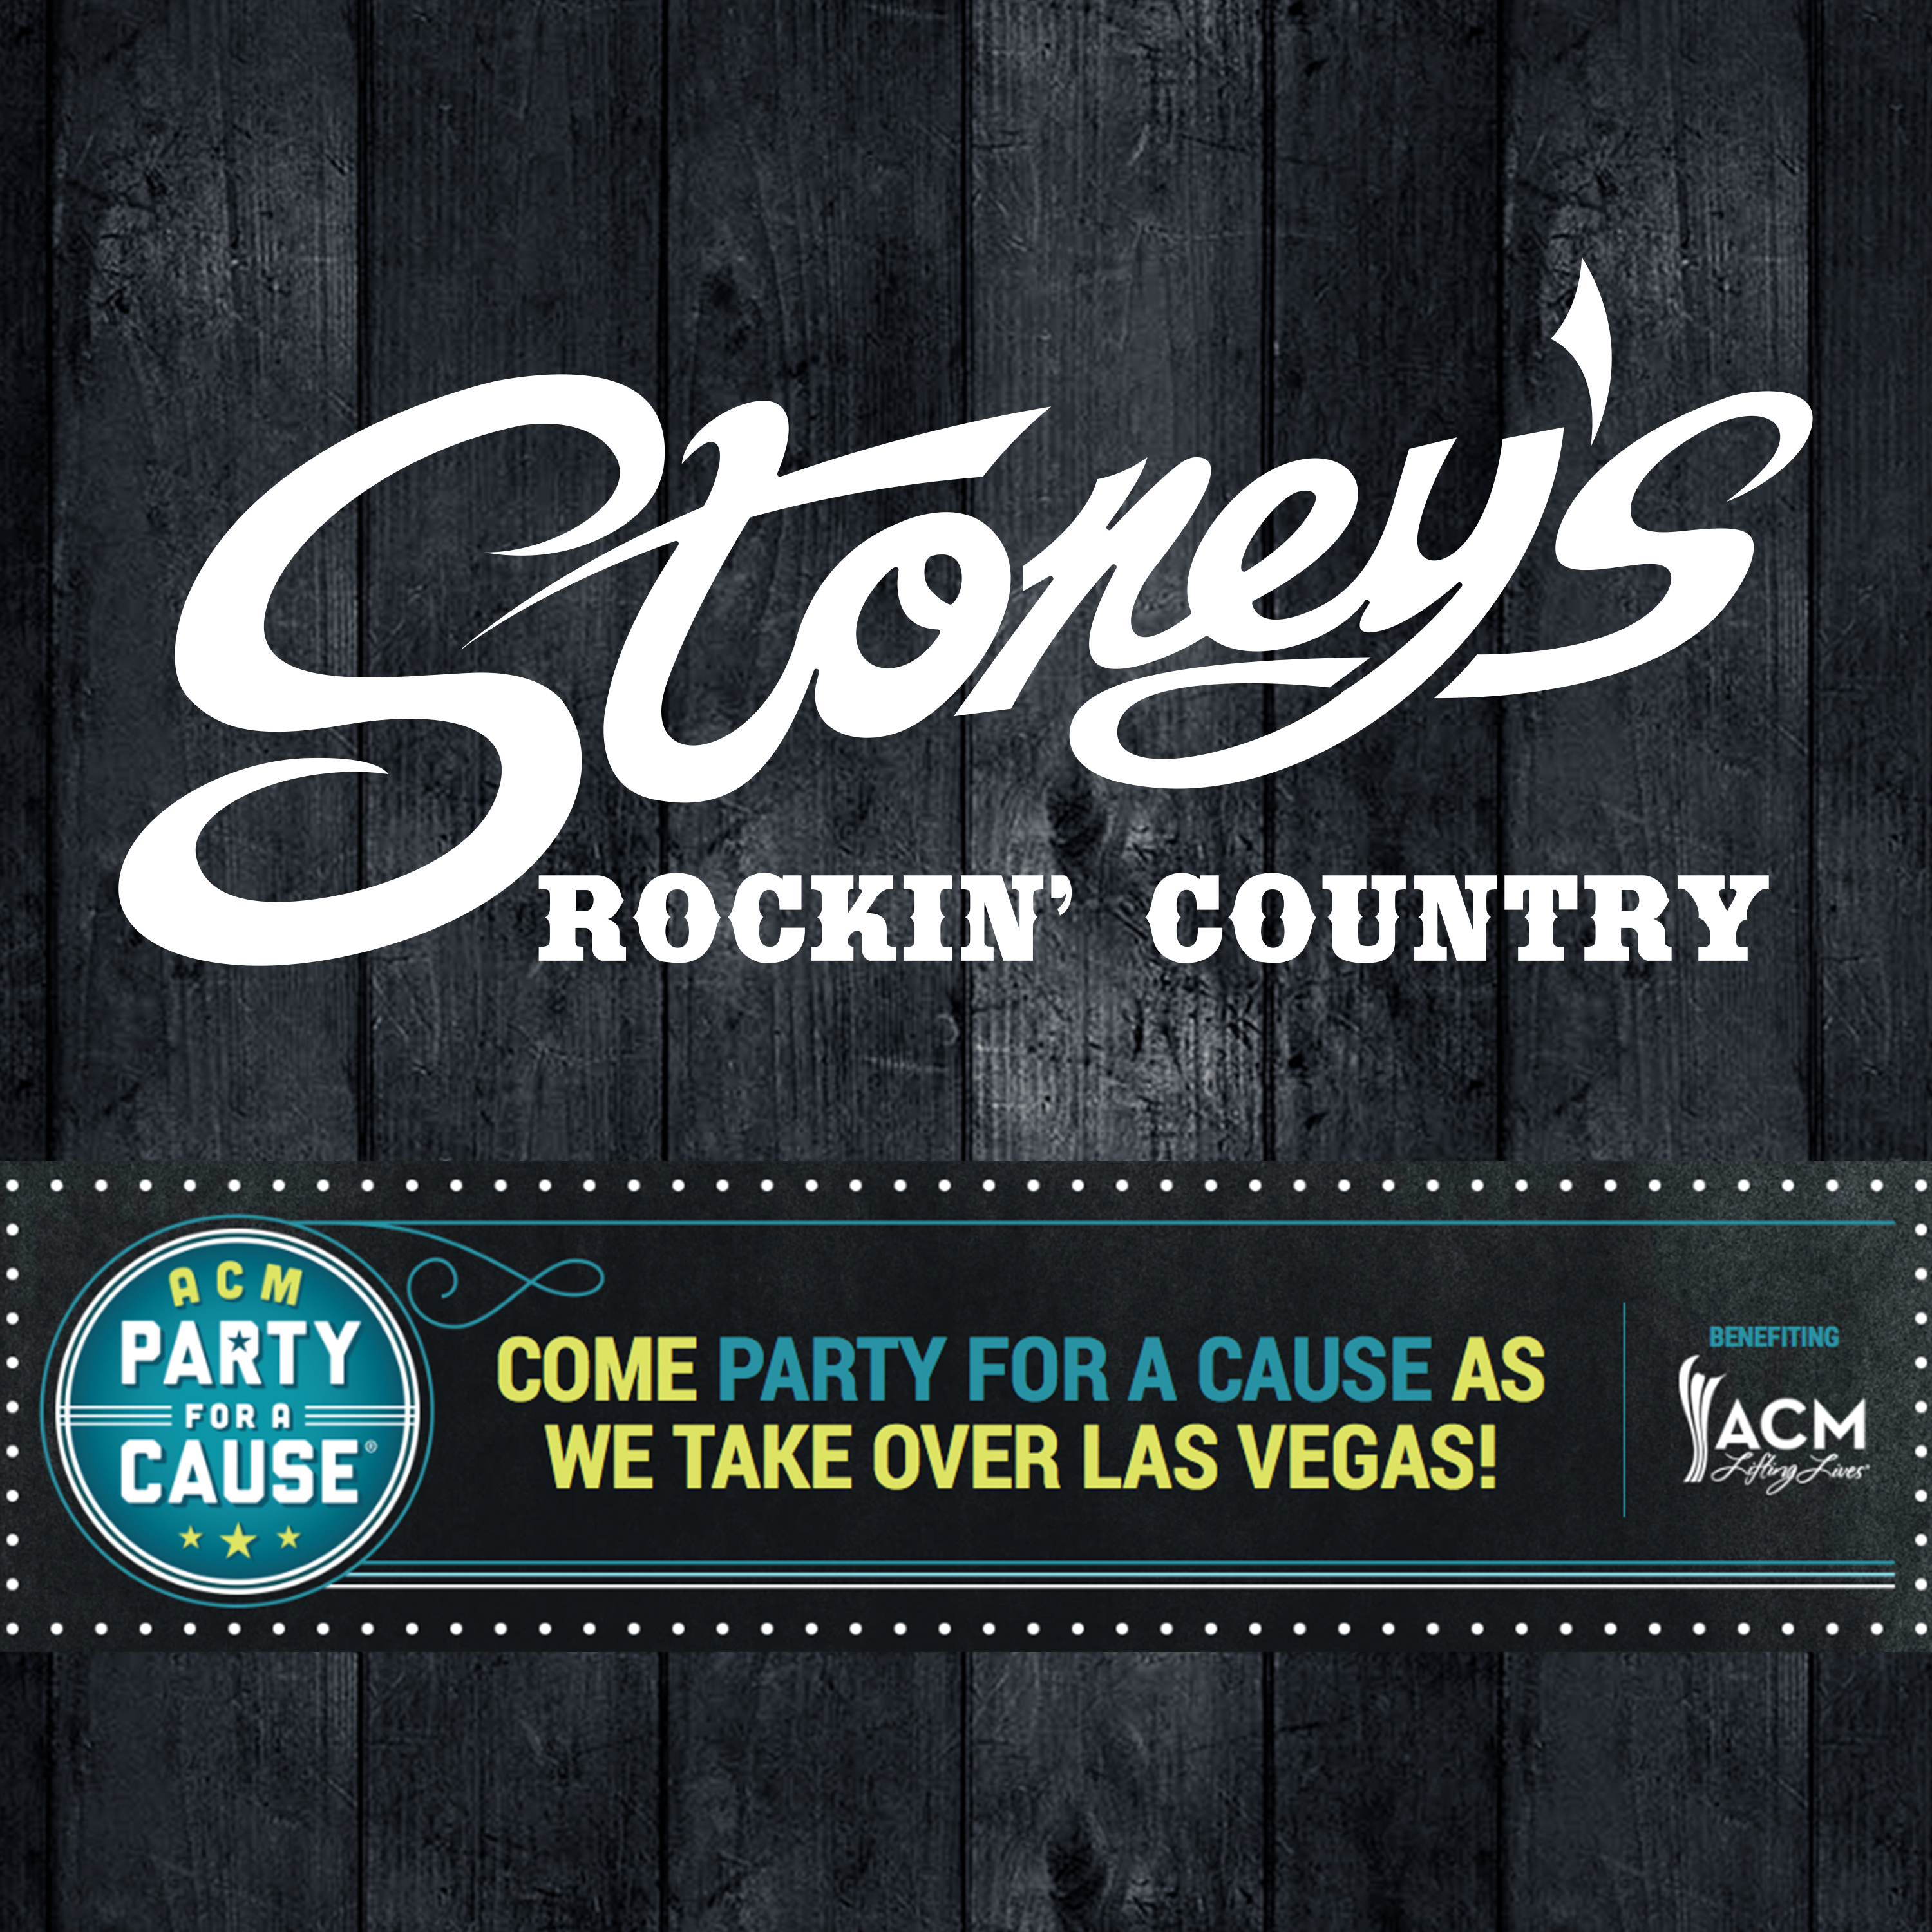 ACM After Party For A Cause: Stoney’s Rockin’ Country